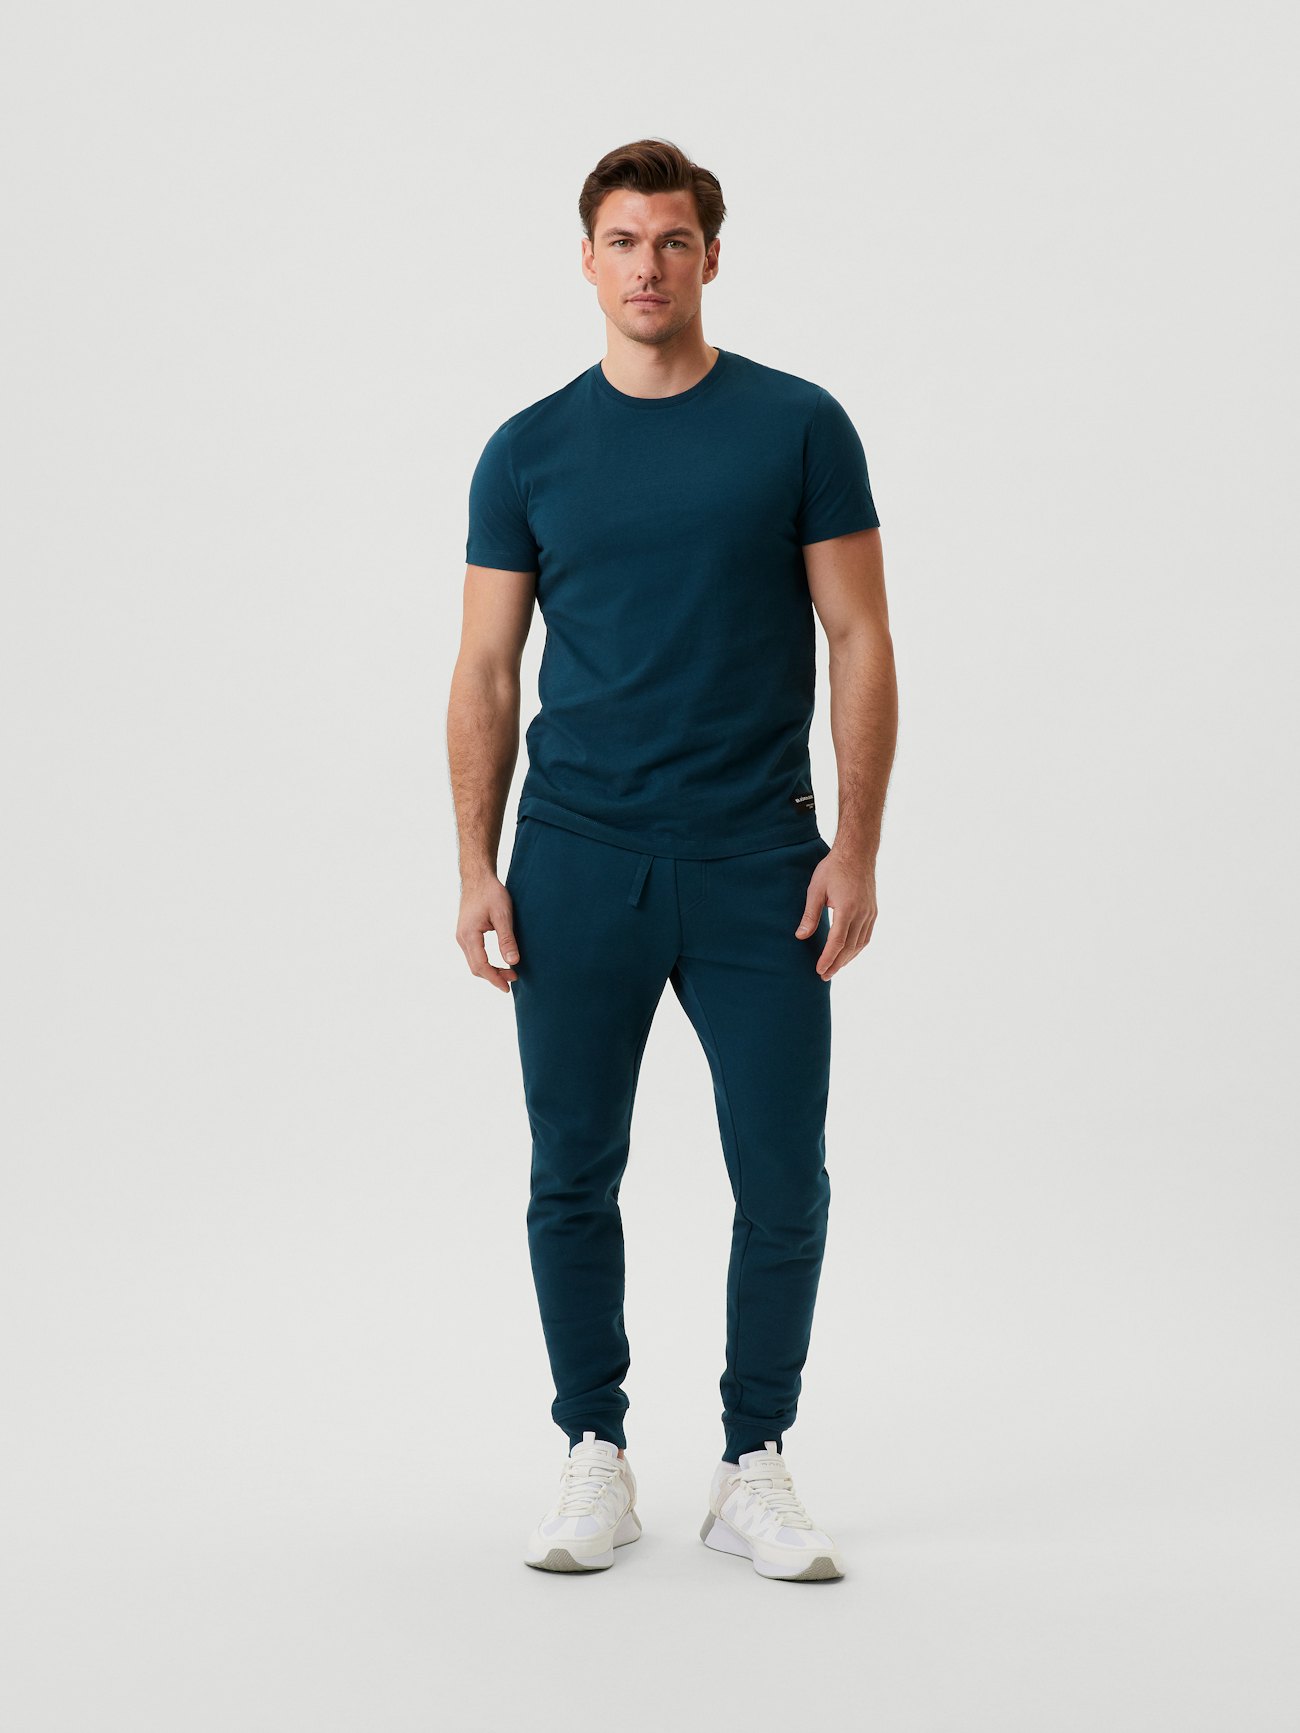 Centre Tapered Pants - Reflecting Pond